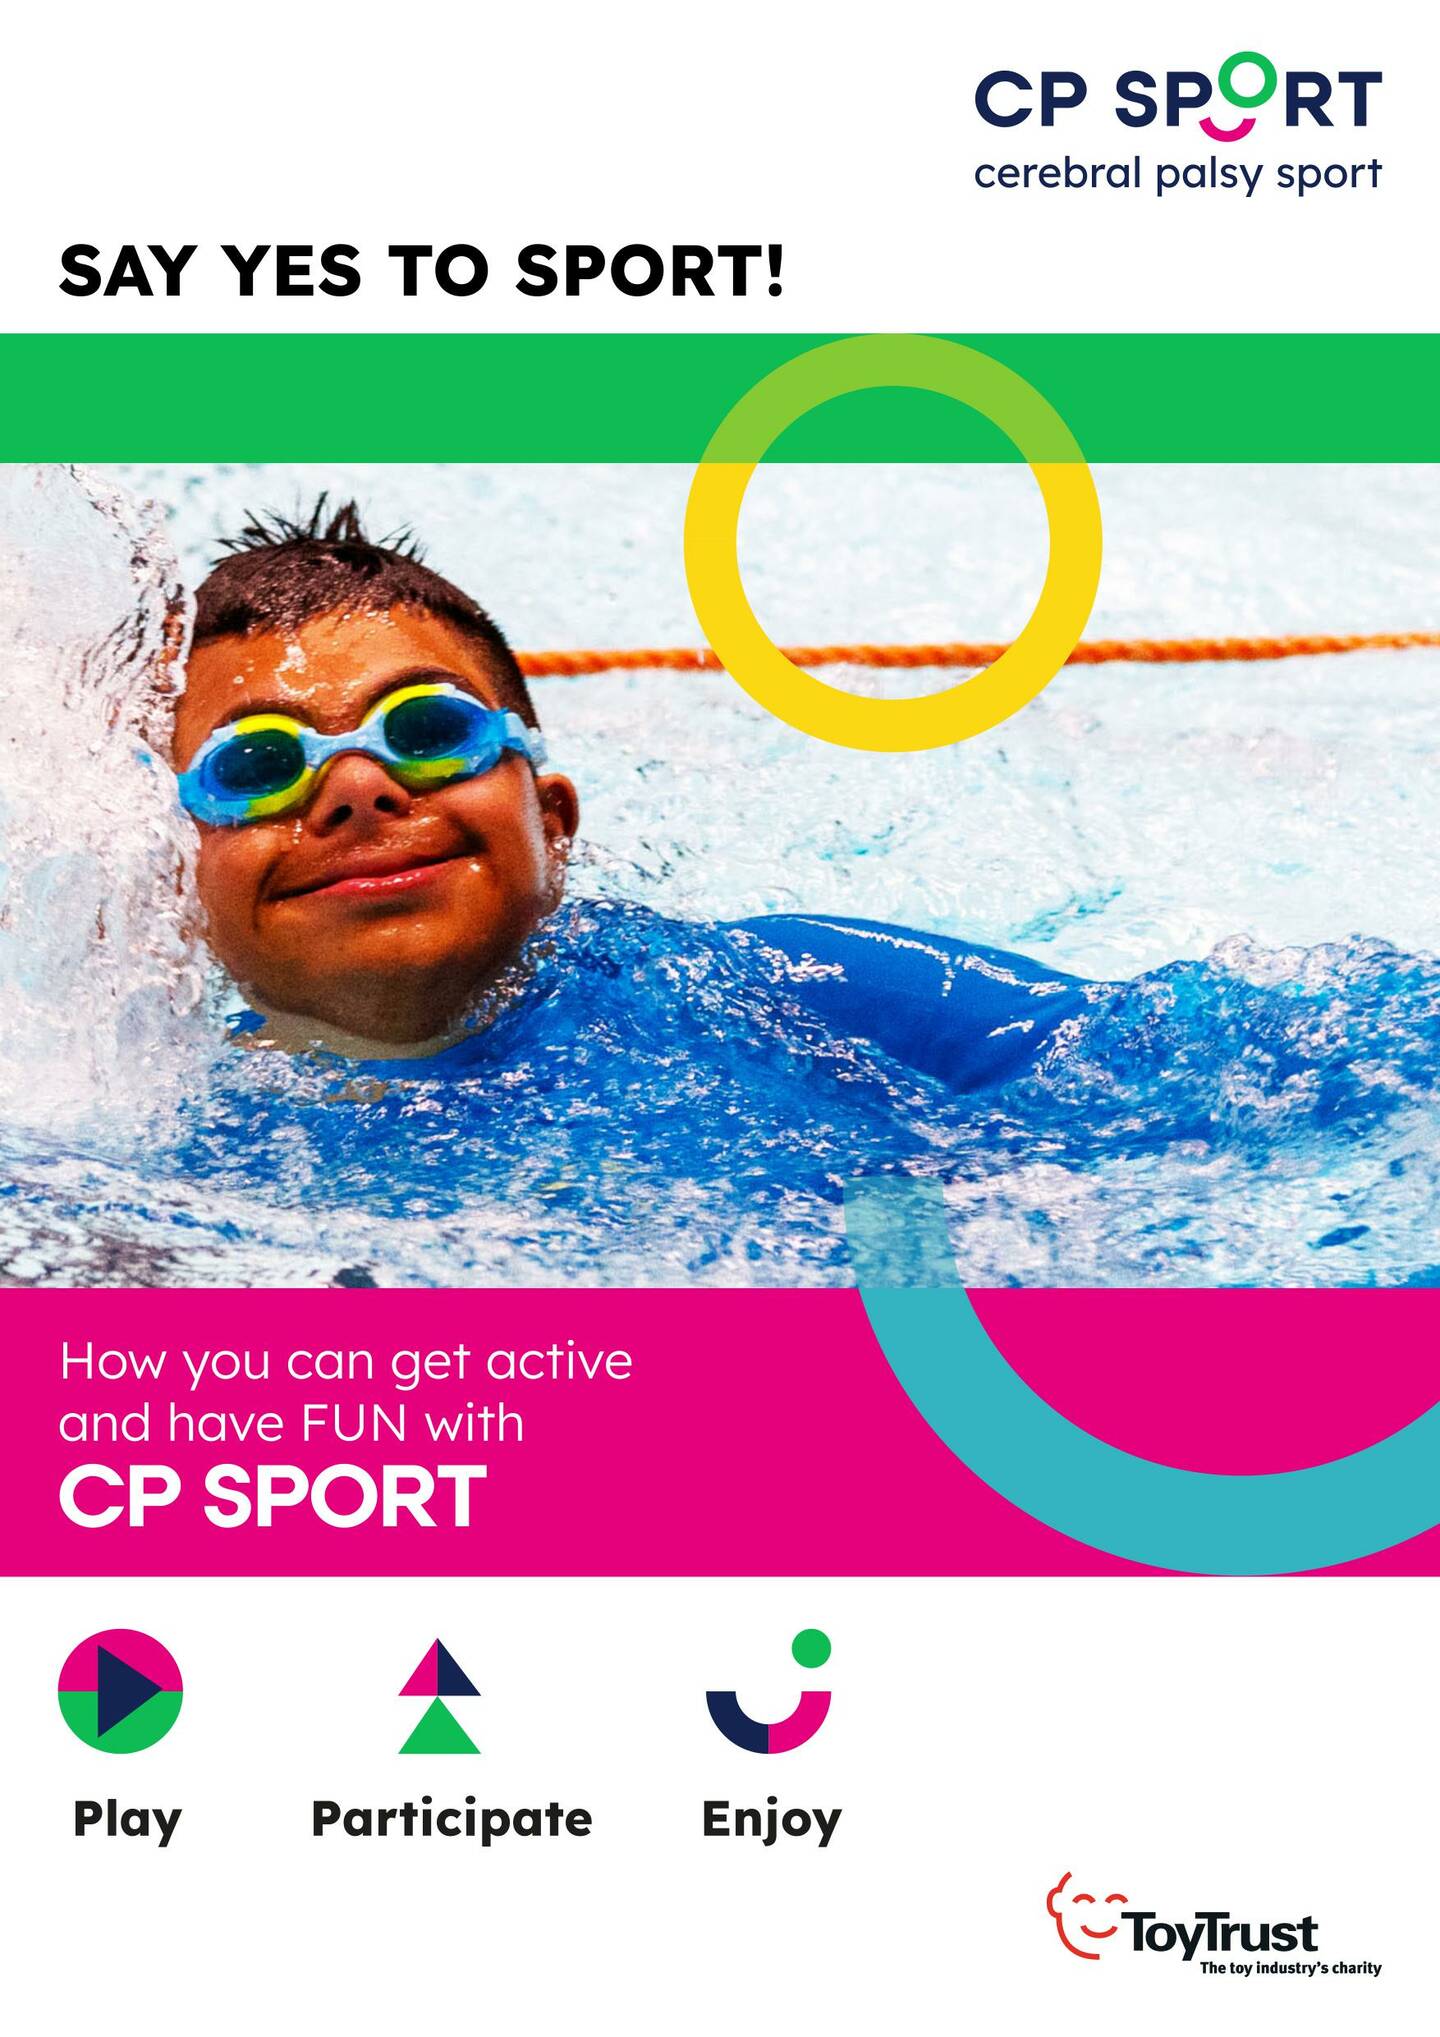 CP Sport 'Say Yes to Sport' cover showing a boy swimming.